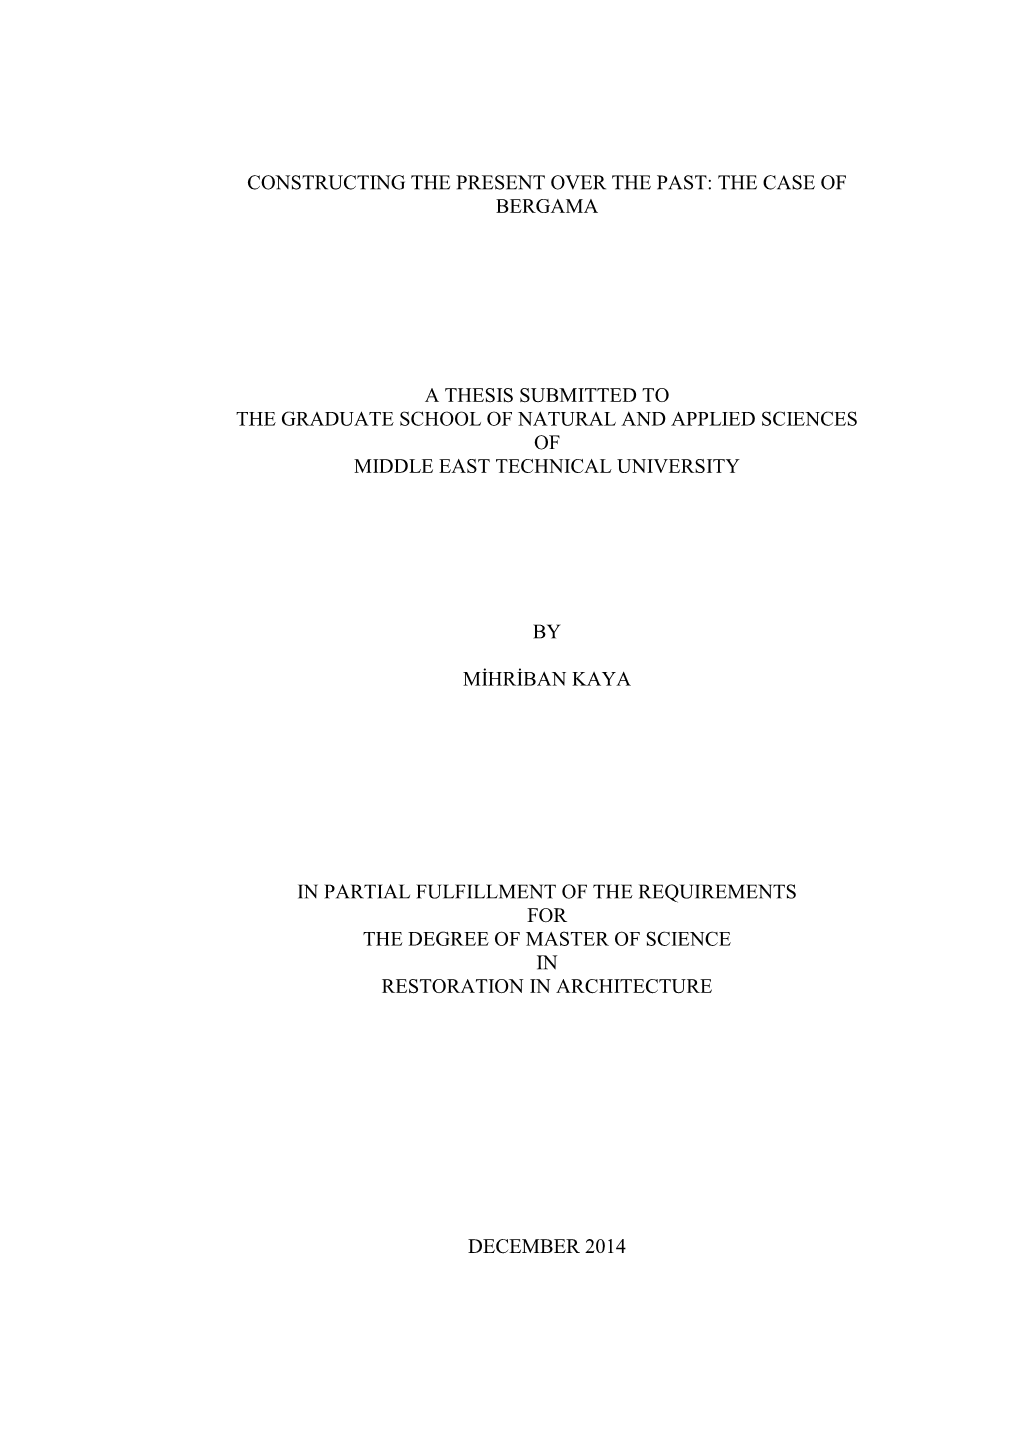 The Case of Bergama a Thesis Submitted to the Graduate